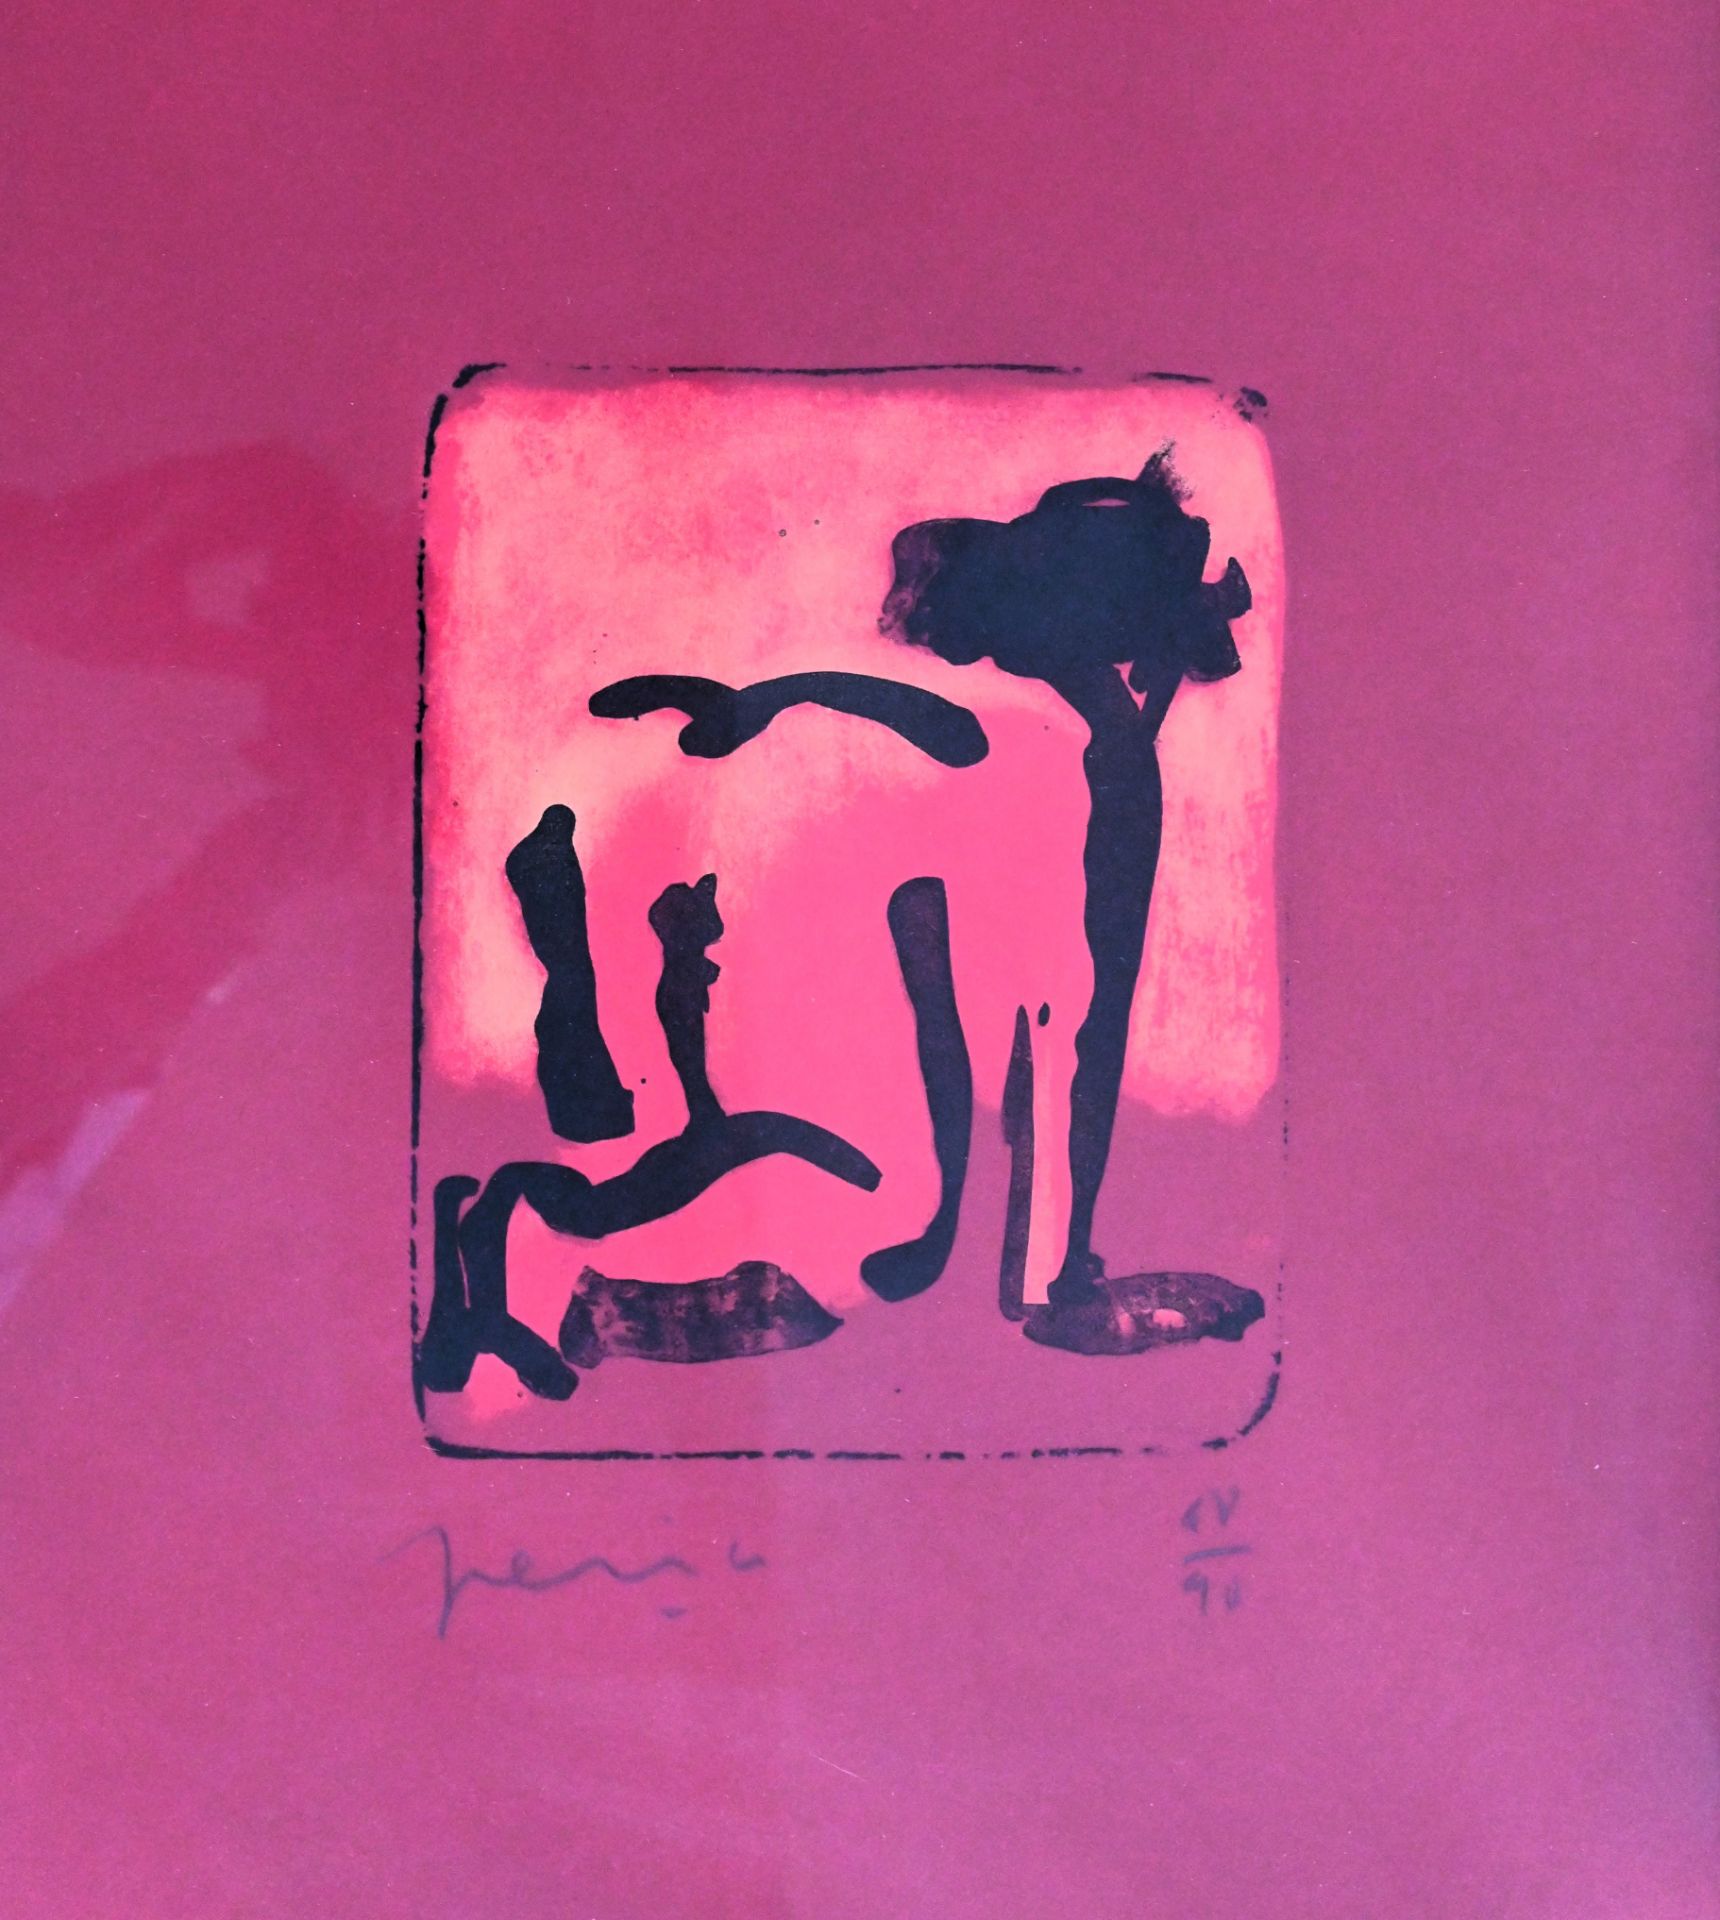 Nude study Etching on red paper no. 68/90 artist unknown - Image 2 of 2